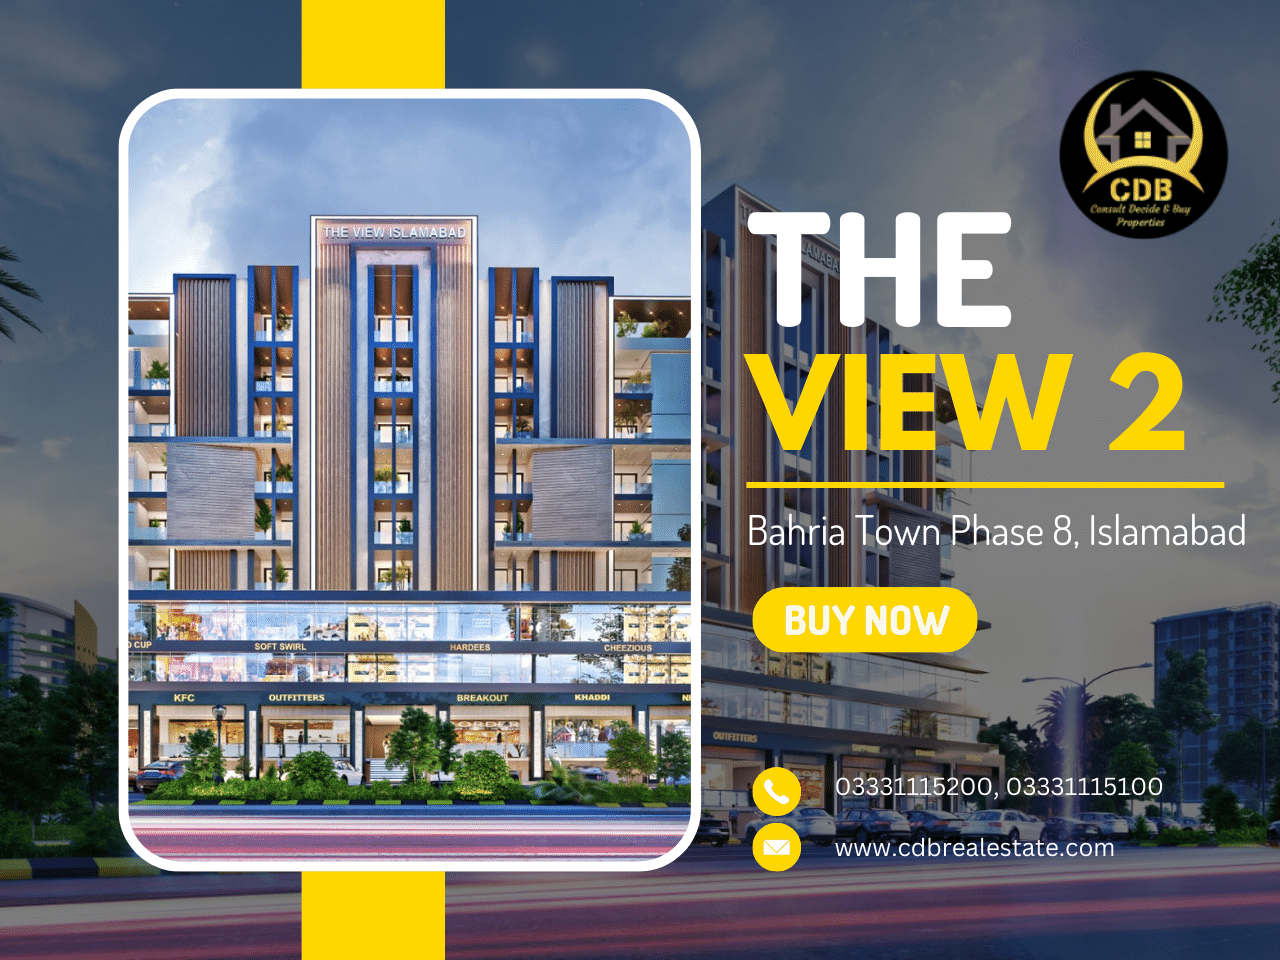 The View 2_ A Promising Project in Bahria Town Phase 8, Islamabad